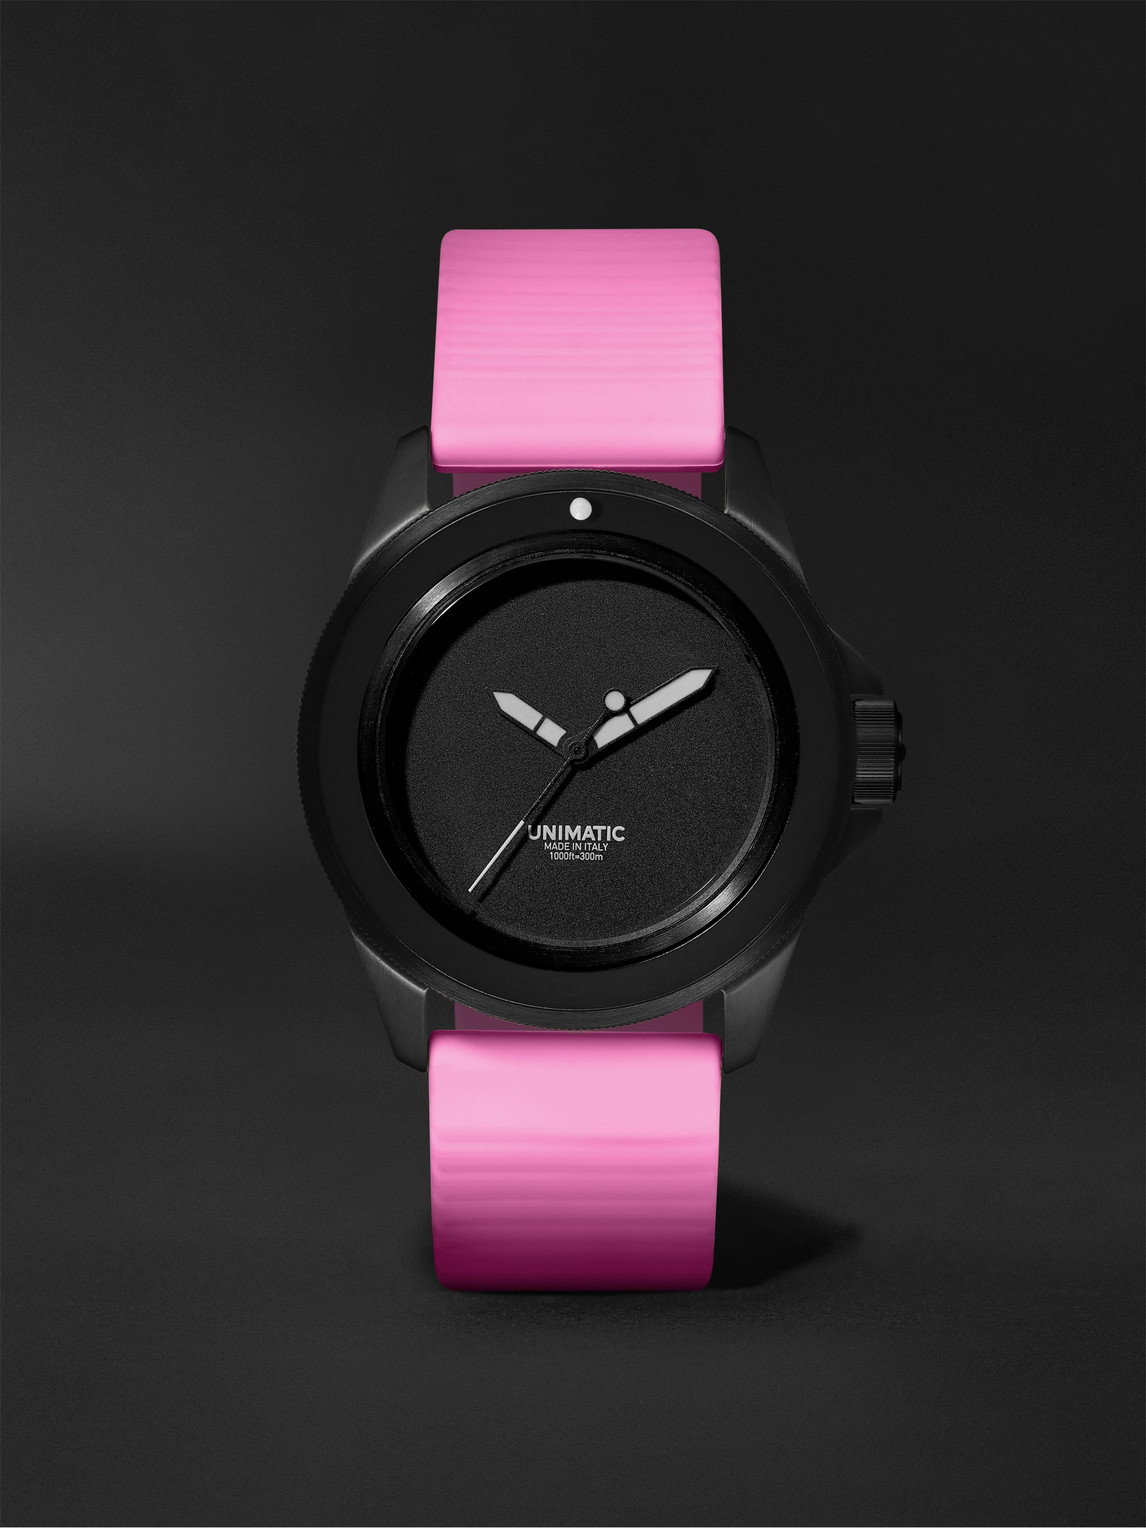 Unimatic Model One Miami Pink Limited Edition Automatic 40mm Blackened Stainless Steel And Tpu Watch, Ref. No